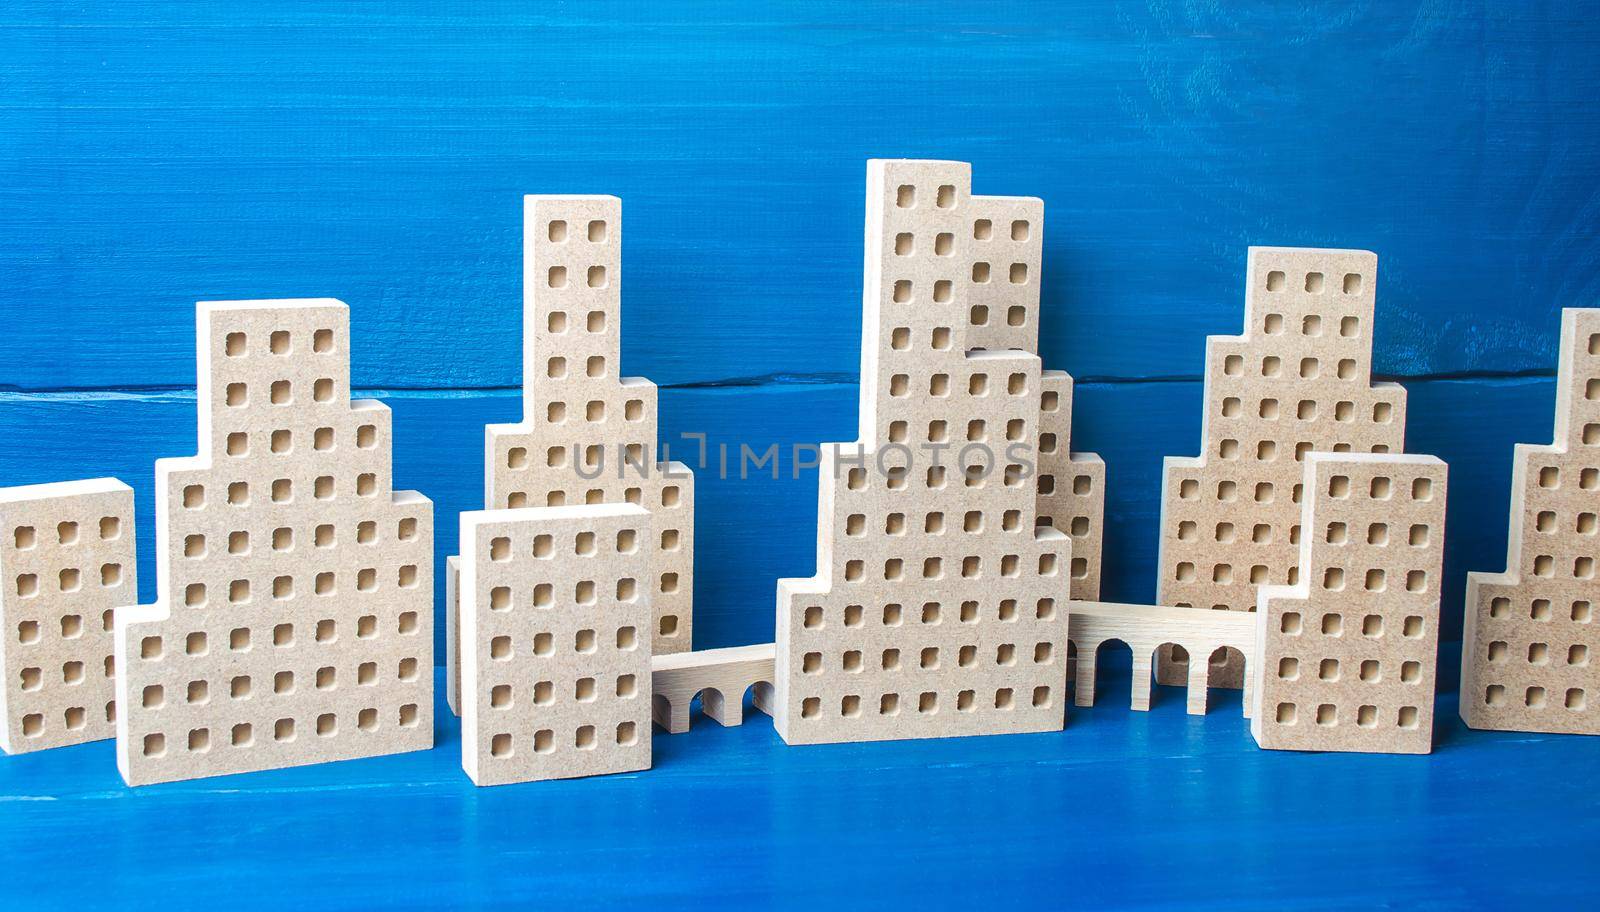 City of figures of buildings on a blue background. Concept for real estate, urban environment and transport infrastructure. City management and planning. Construction industry, growth and development. by iLixe48